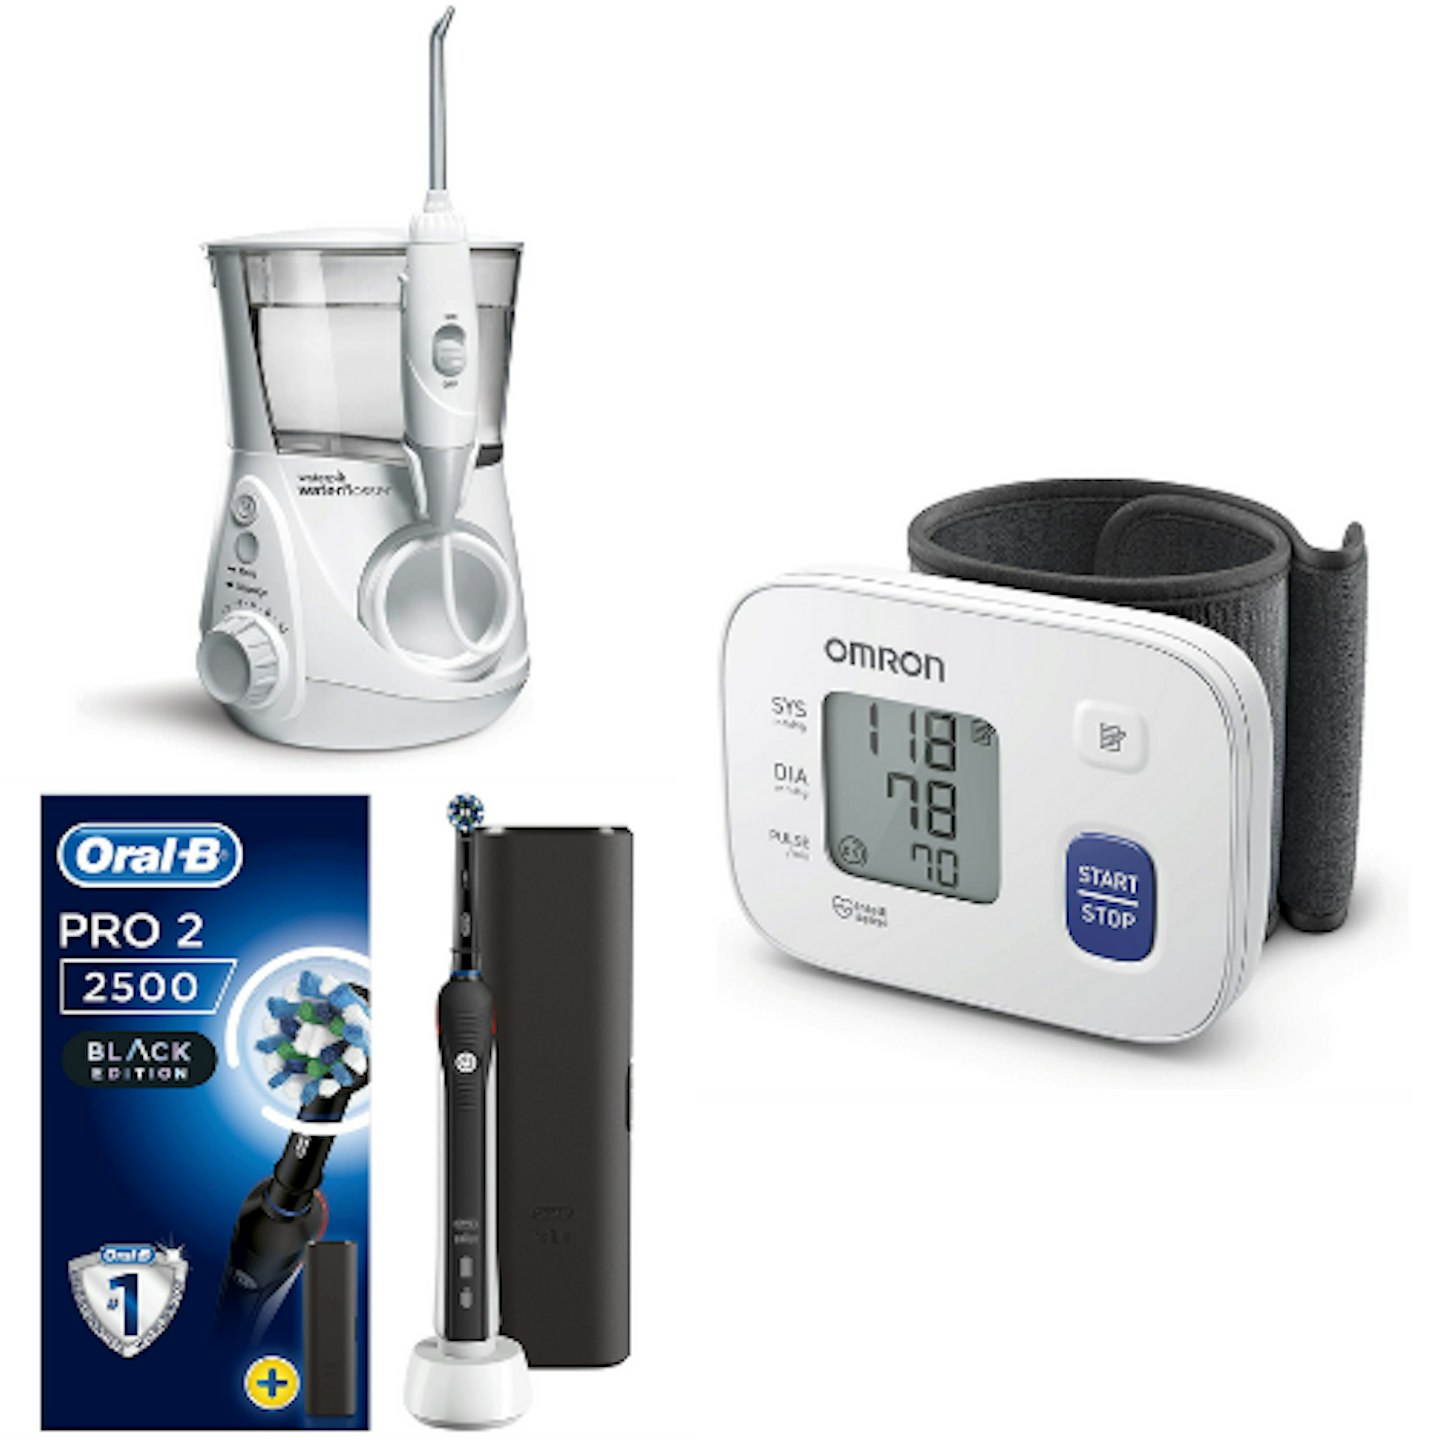 Up to 70% off Oral Care & Healthcare Appliances: Oral B, Philips, Omron & more